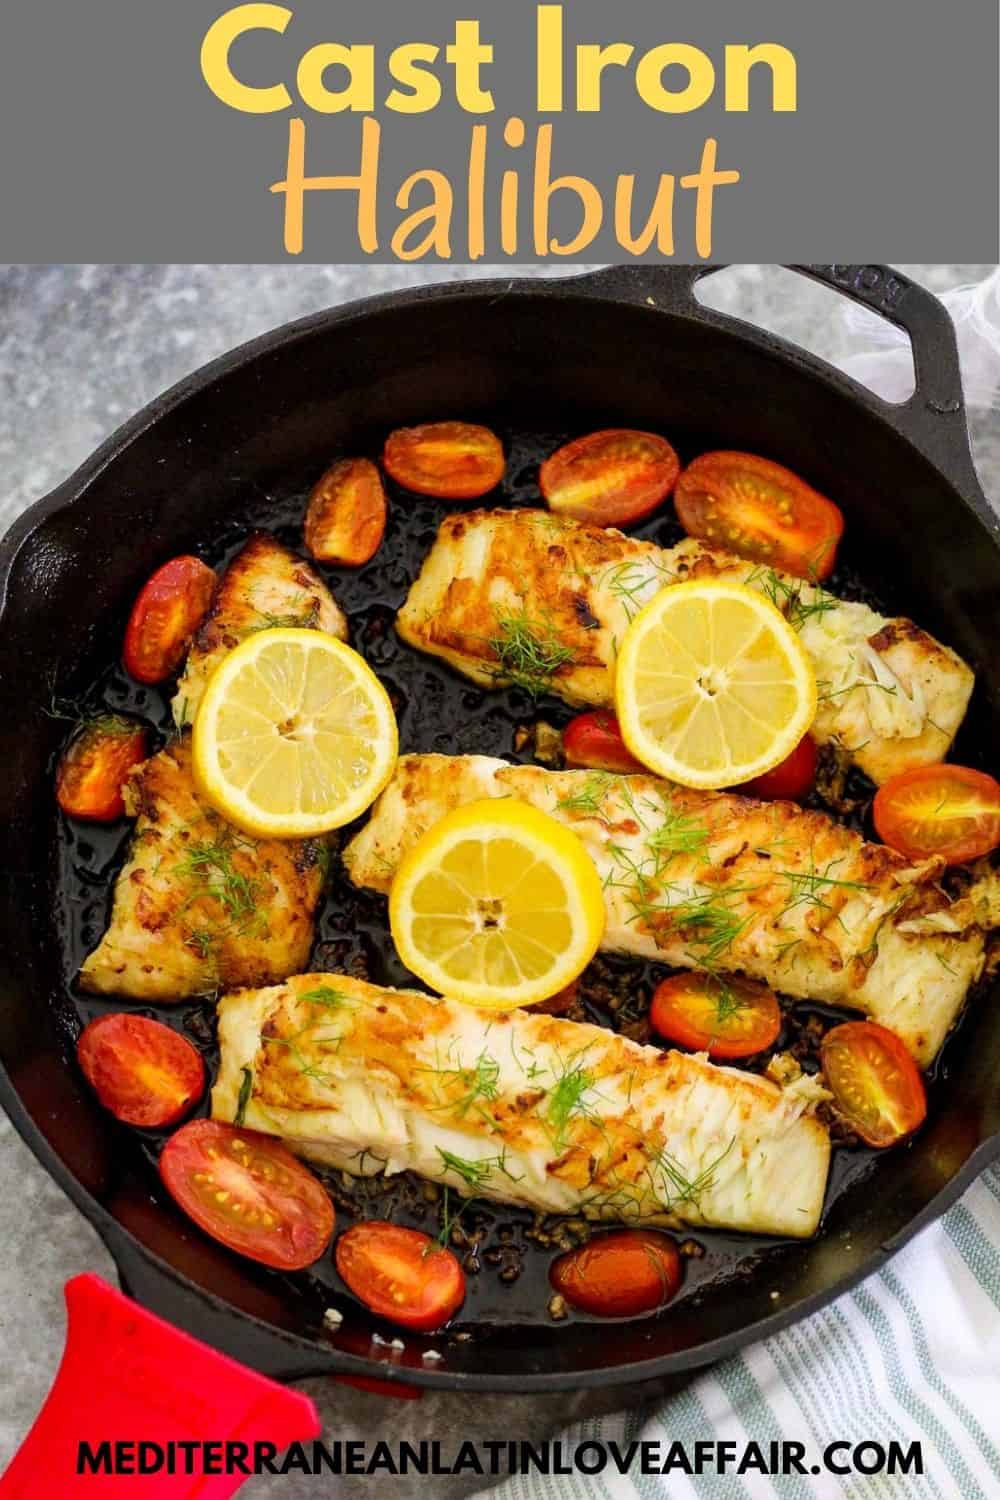 An image prepared specifically for Pinterest, It shows the final cooked version of the Halibut recipe in cast iron skillet, garnished with lemon and dill. Top of the picture has a title bar and bottom the website link. #halibut #mediterraneanlatinloveaffair